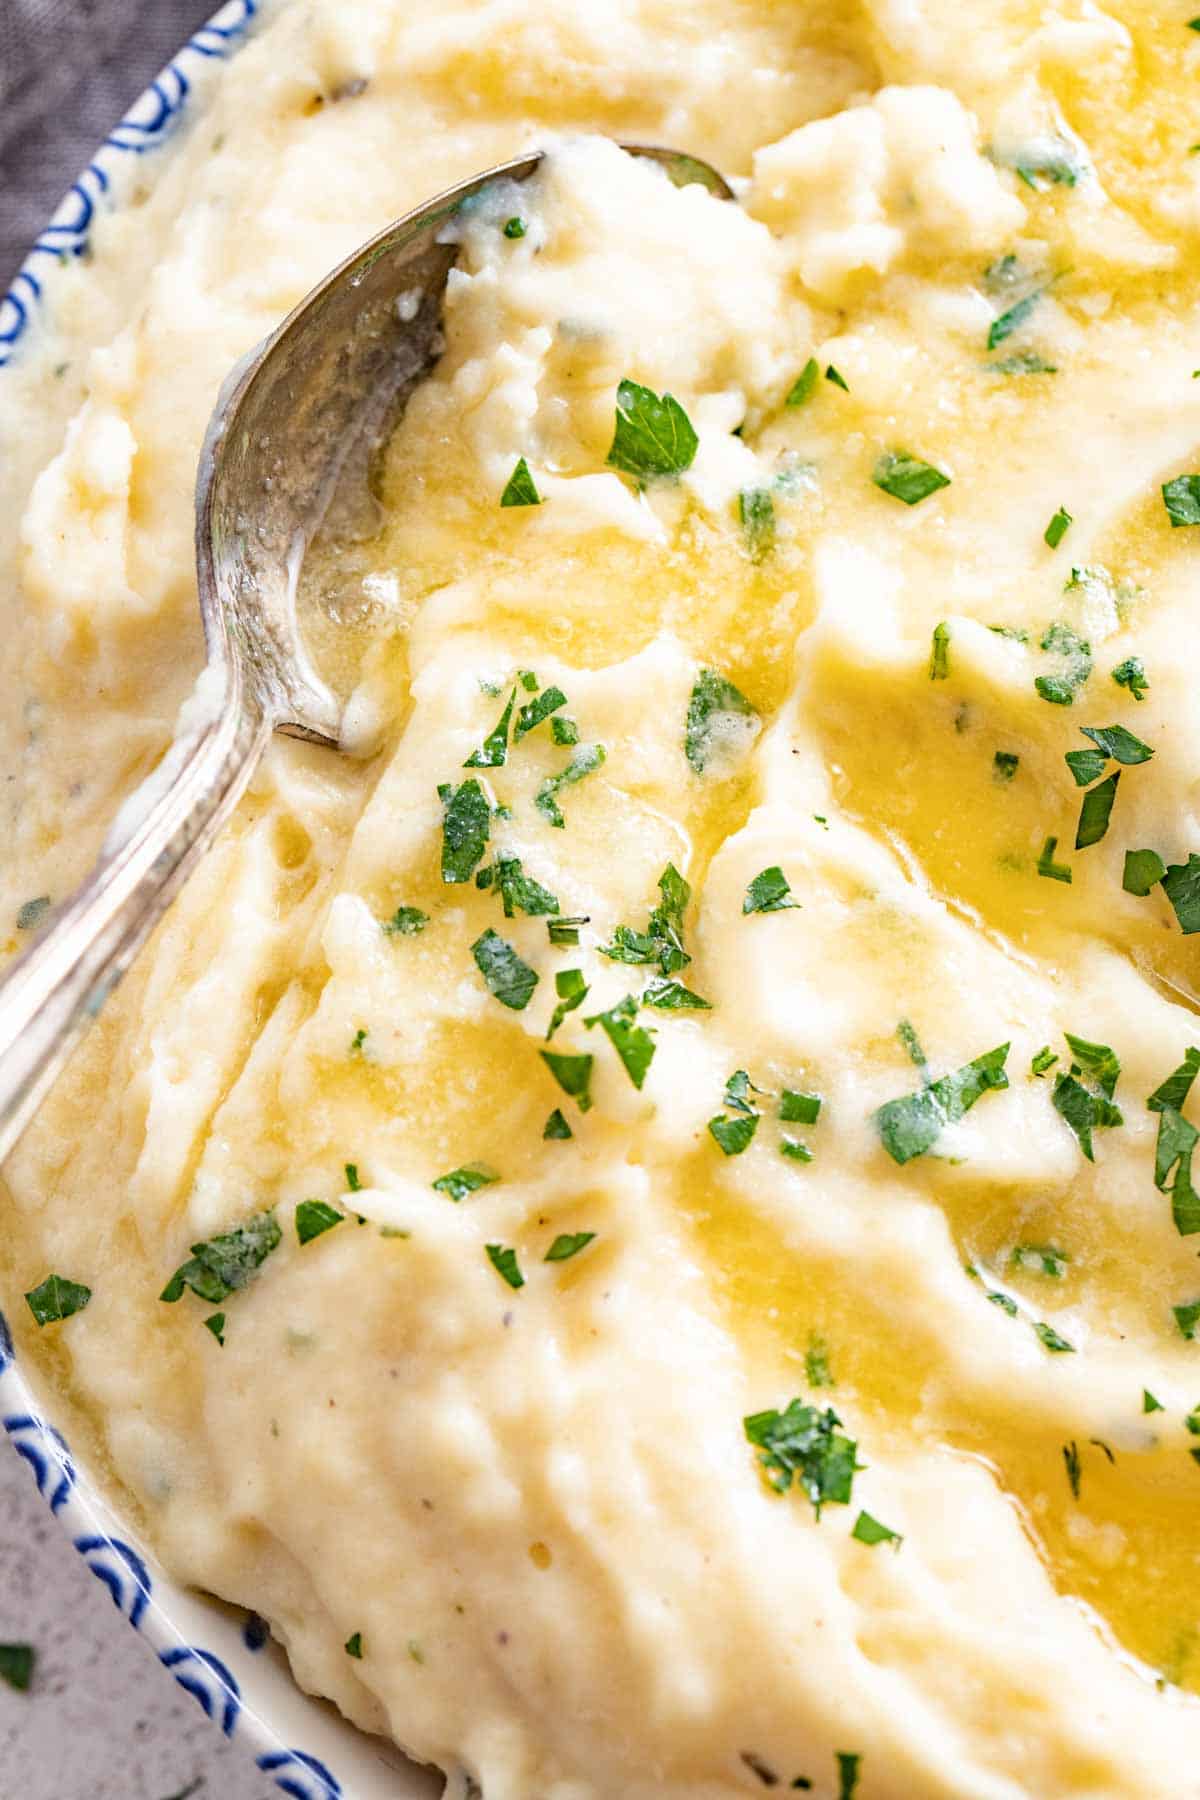 A spoon dipping into mashed potatoes.